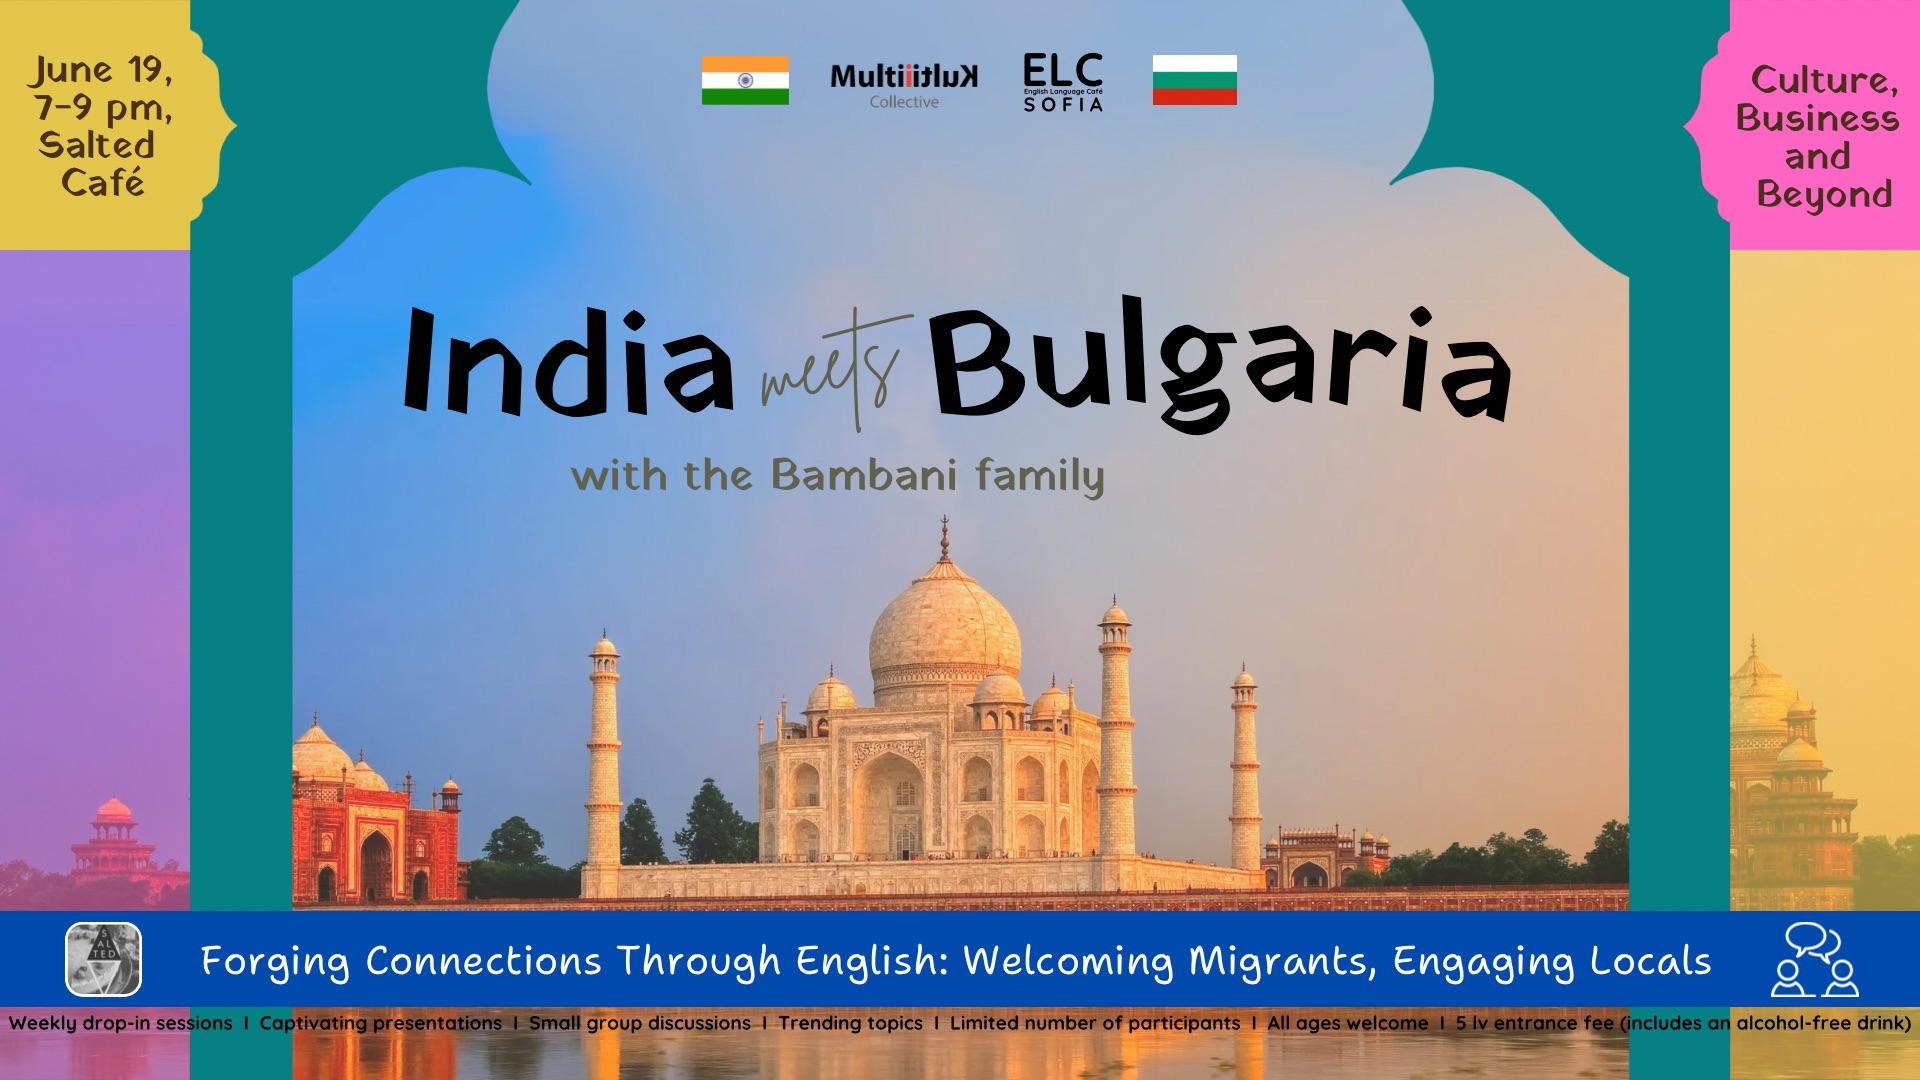 India Meets Bulgaria: Culture, Business and Beyond